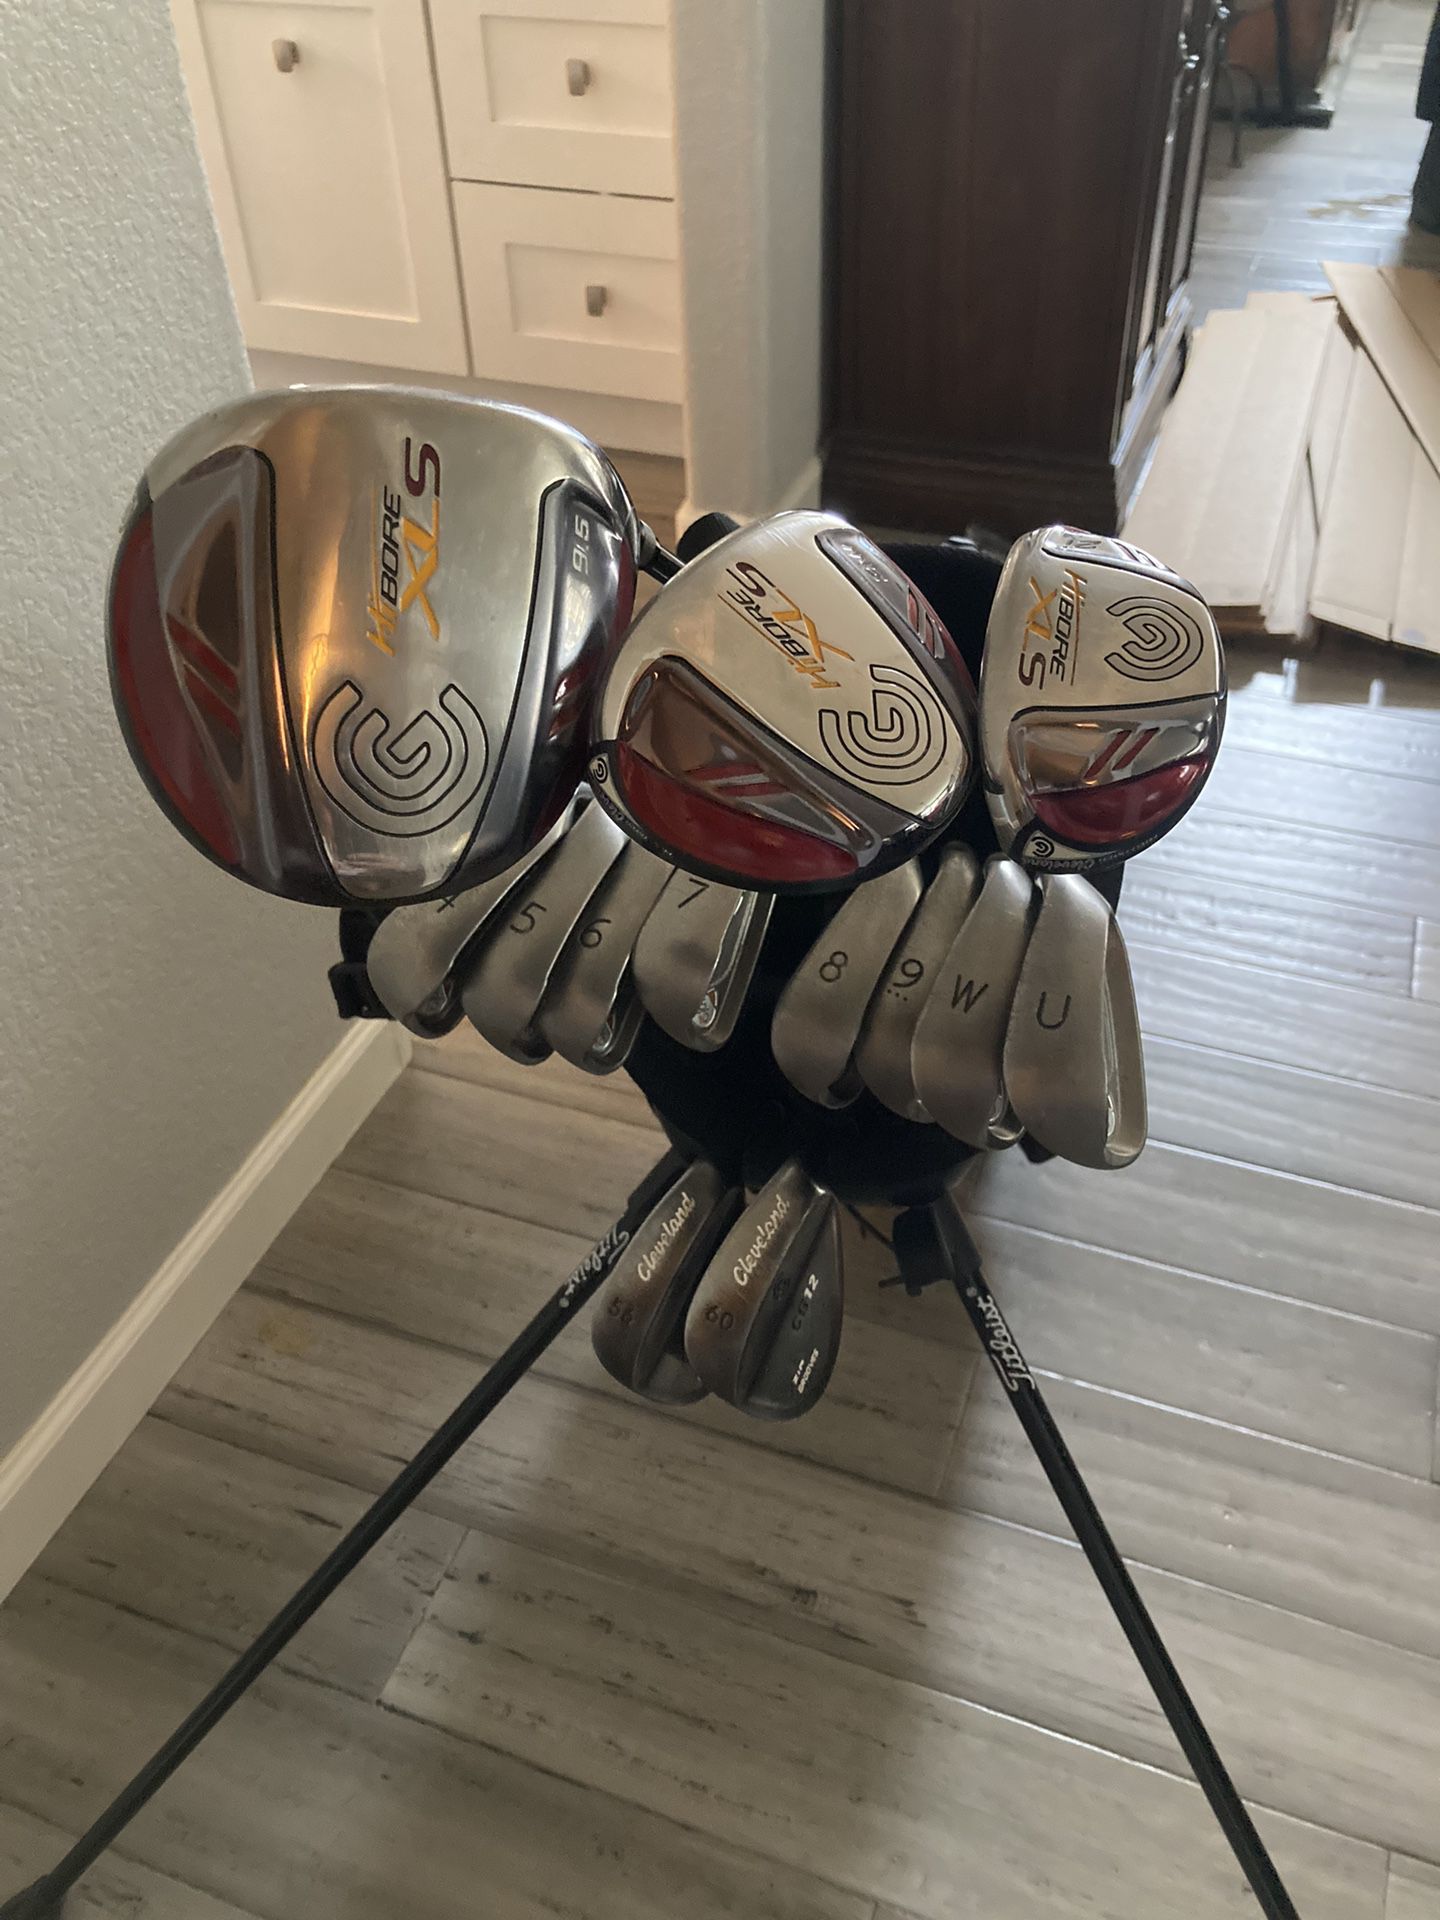 COMPLETE NAME BRAND GOLF CLUB SET IRONS WOODS DRIVER HYBRID WEDGES PUTTER  BAG CLEVELAND PING for Sale in Scottsdale, AZ - OfferUp